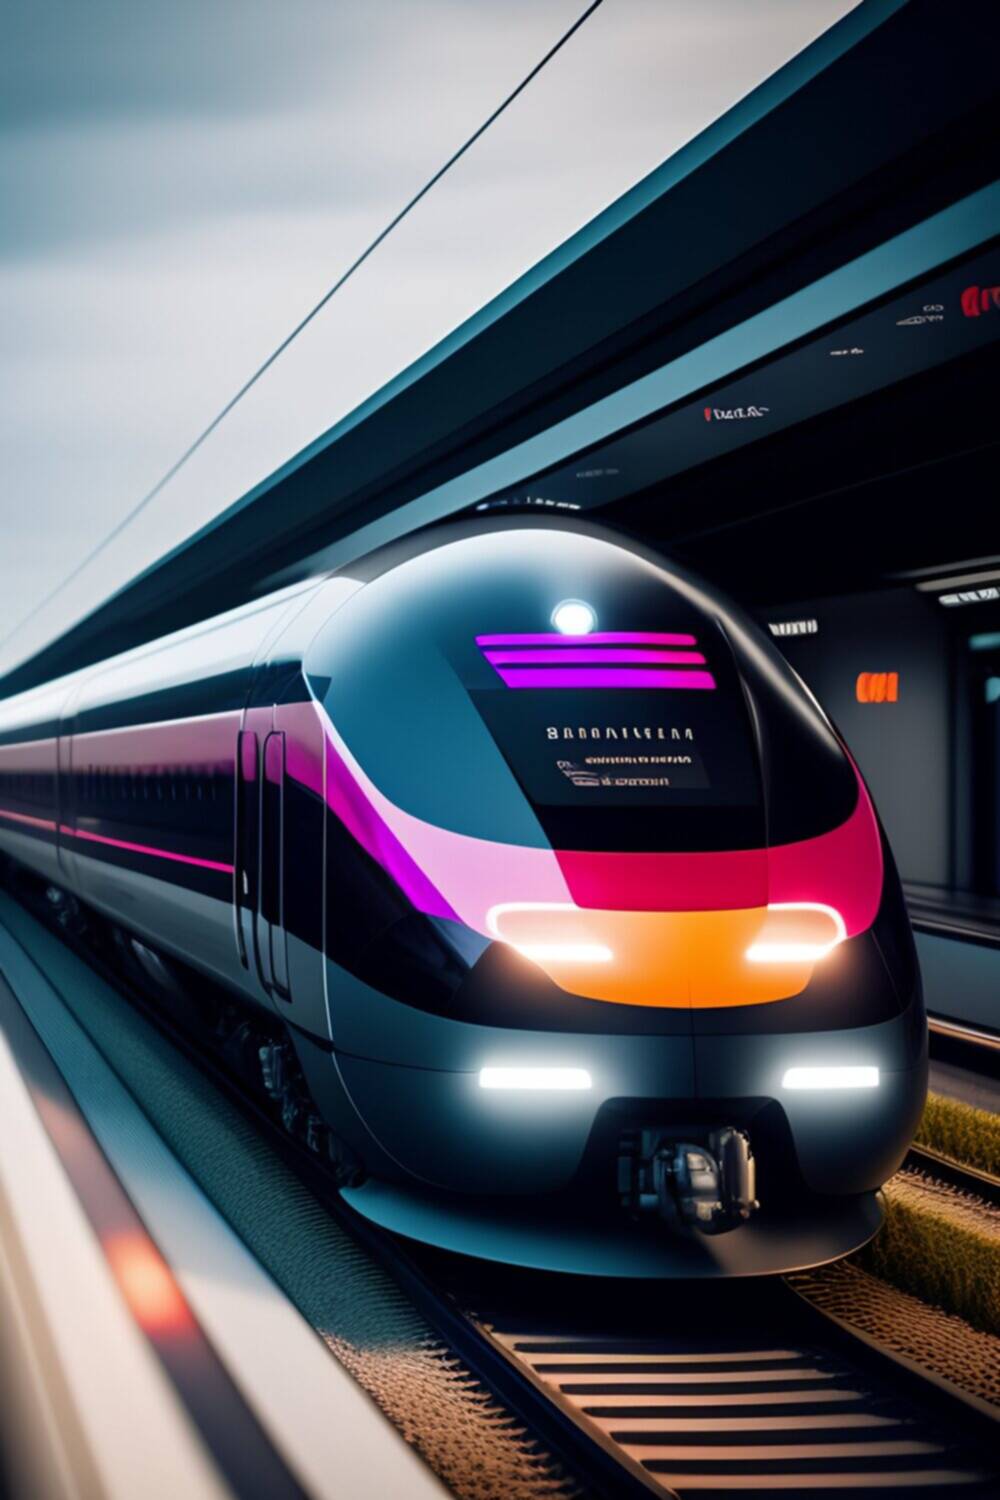 ​The world's fastest train is the Shanghai Maglev in China